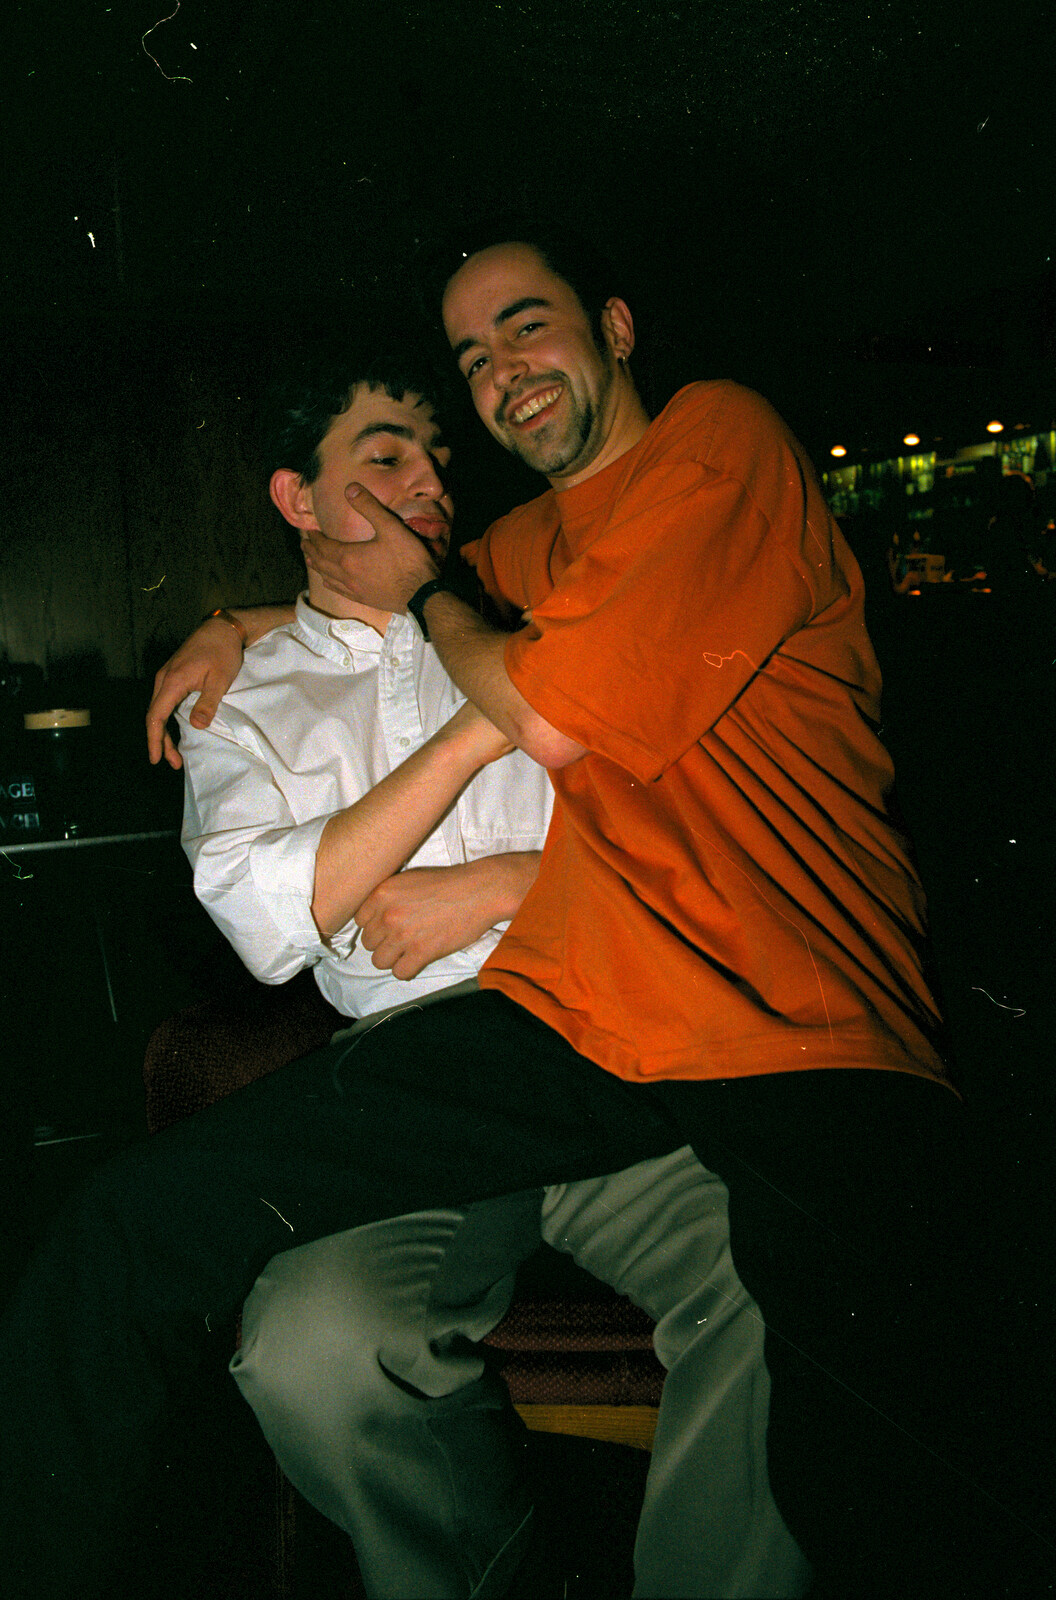 Trev gives Neil a pat on the cheek from CISU Plays Cardinal's Hat in the SCC Social Club, Ipswich, Suffolk - 3rd August 1997